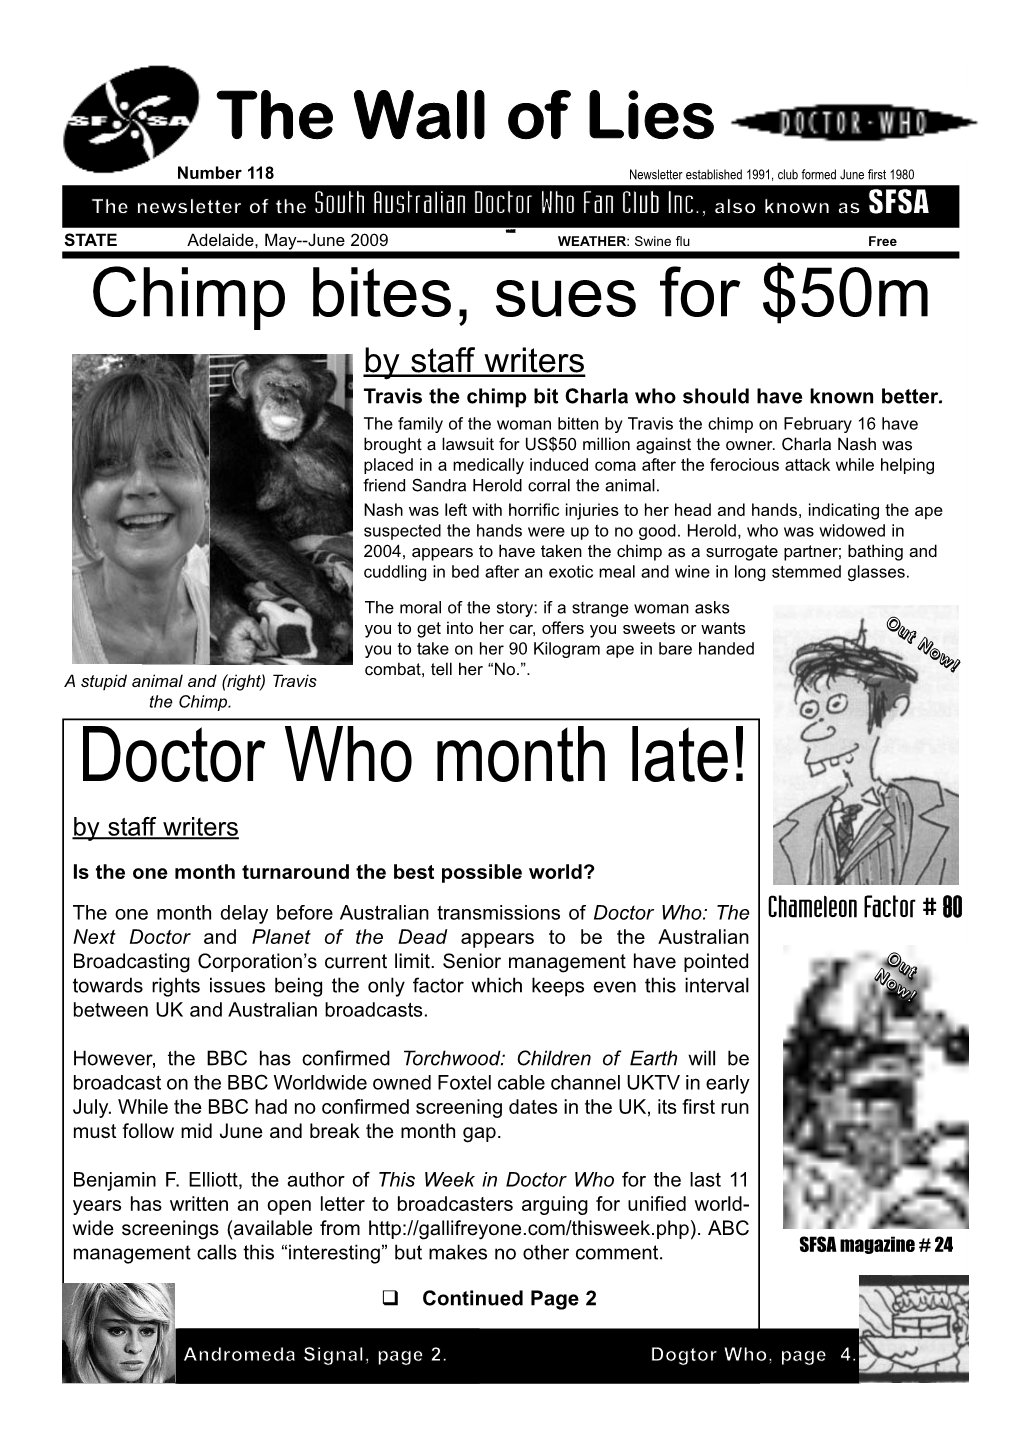 Doctor Who Month Late! by Staff Writers